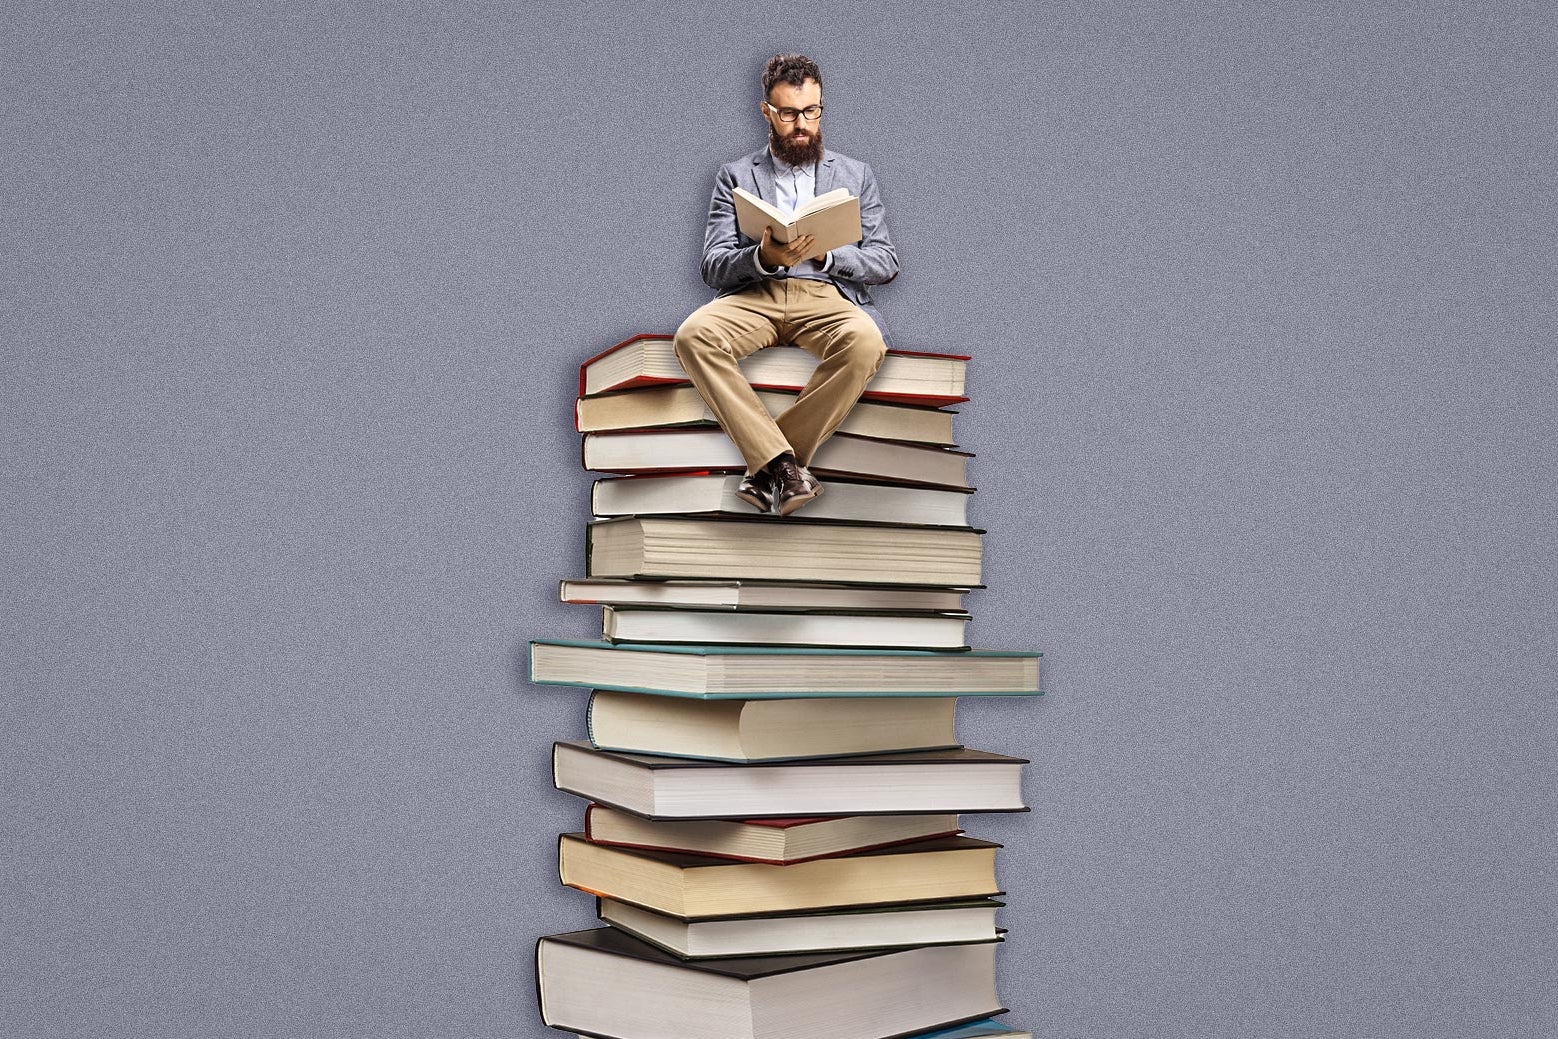 A man in a professor-ish sportscoat sits reading on top of a stack of books.